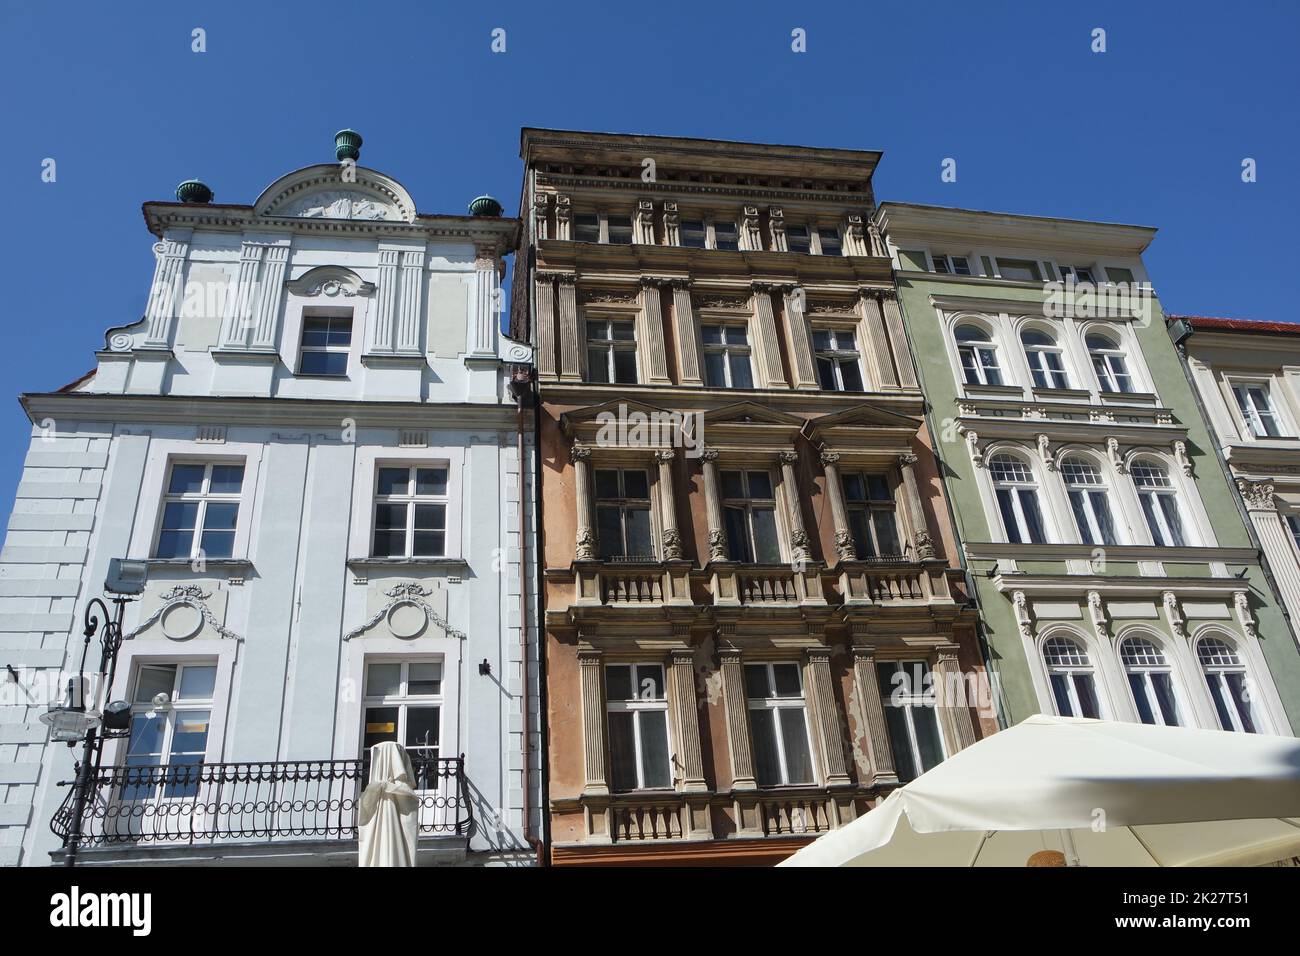 Historical facades on the market square in Poznan, Poland Stock Photo